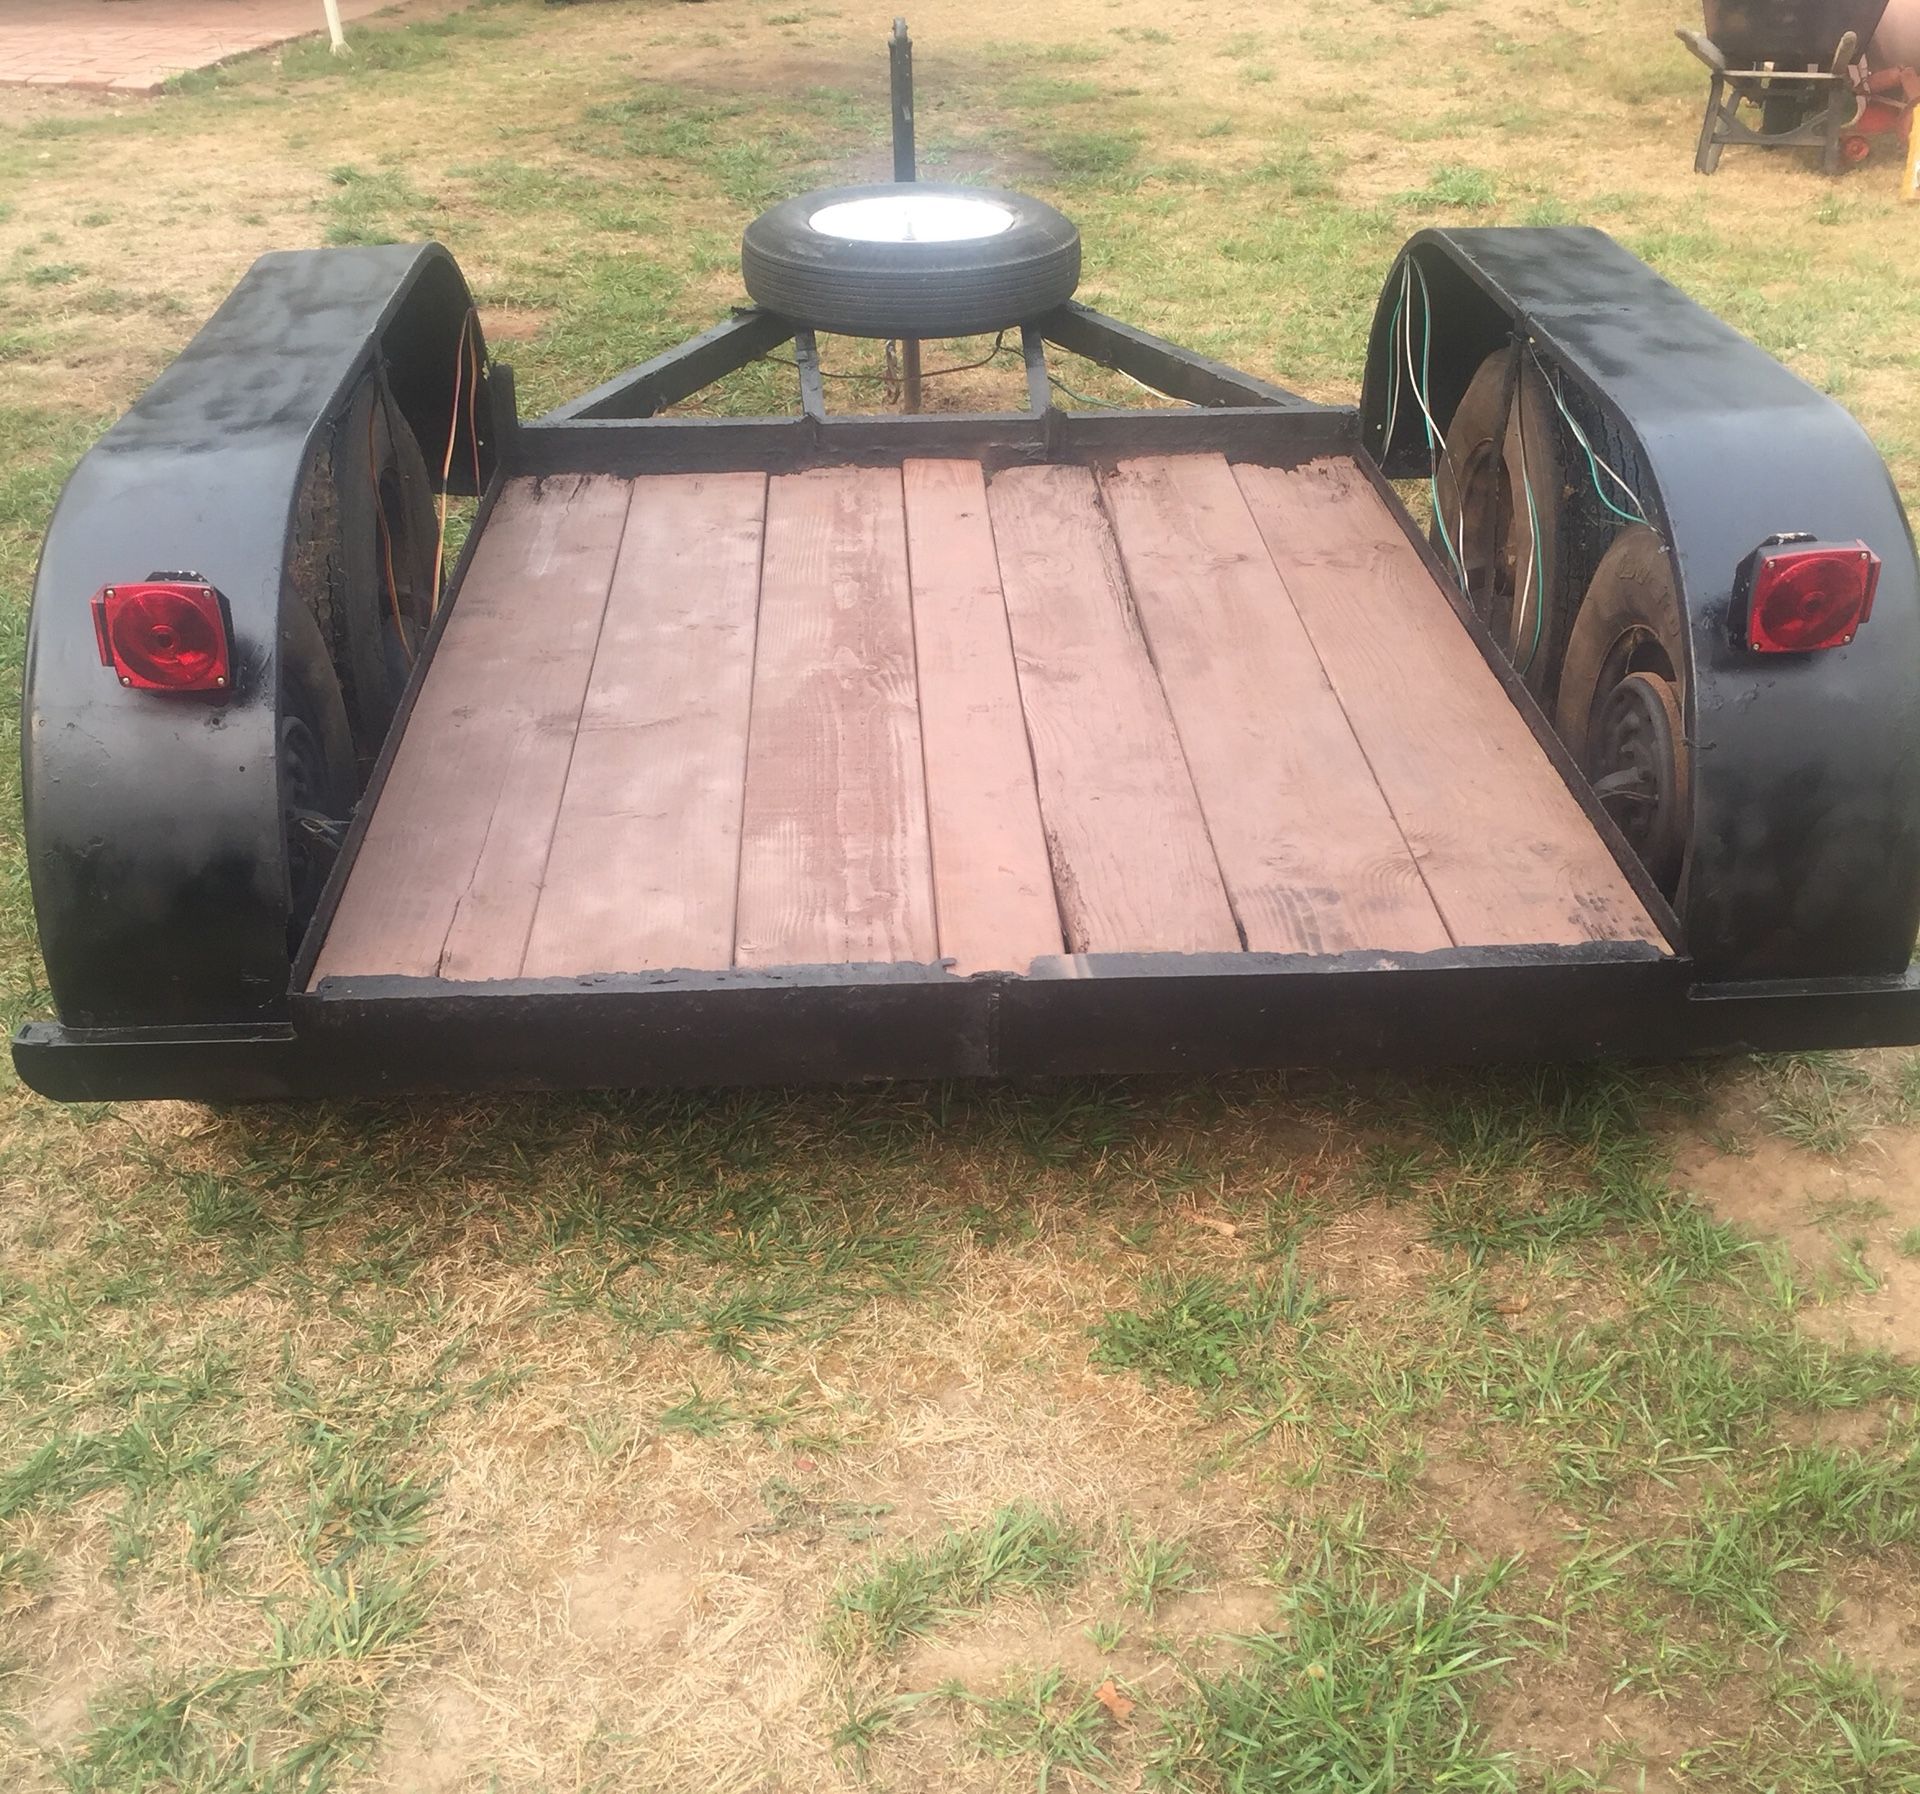 Heavy duty trailer with jack and spare tire